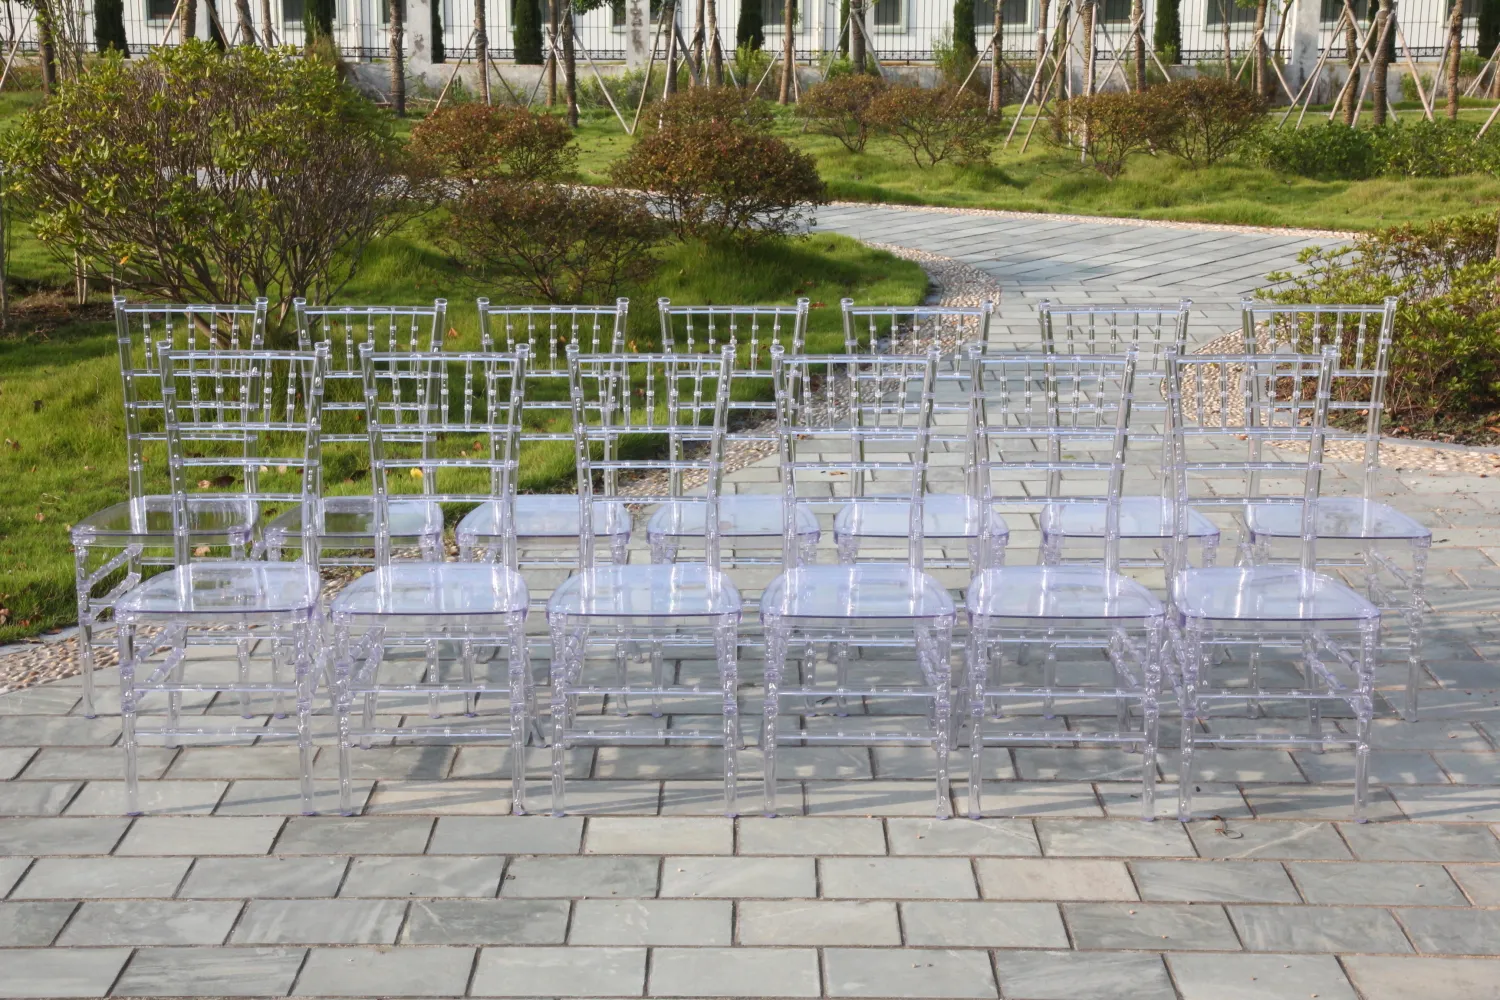 Clear Plastic Resin Chiavari Tiffany Transparent Chairs For Wedding Events Banquet Catering Party